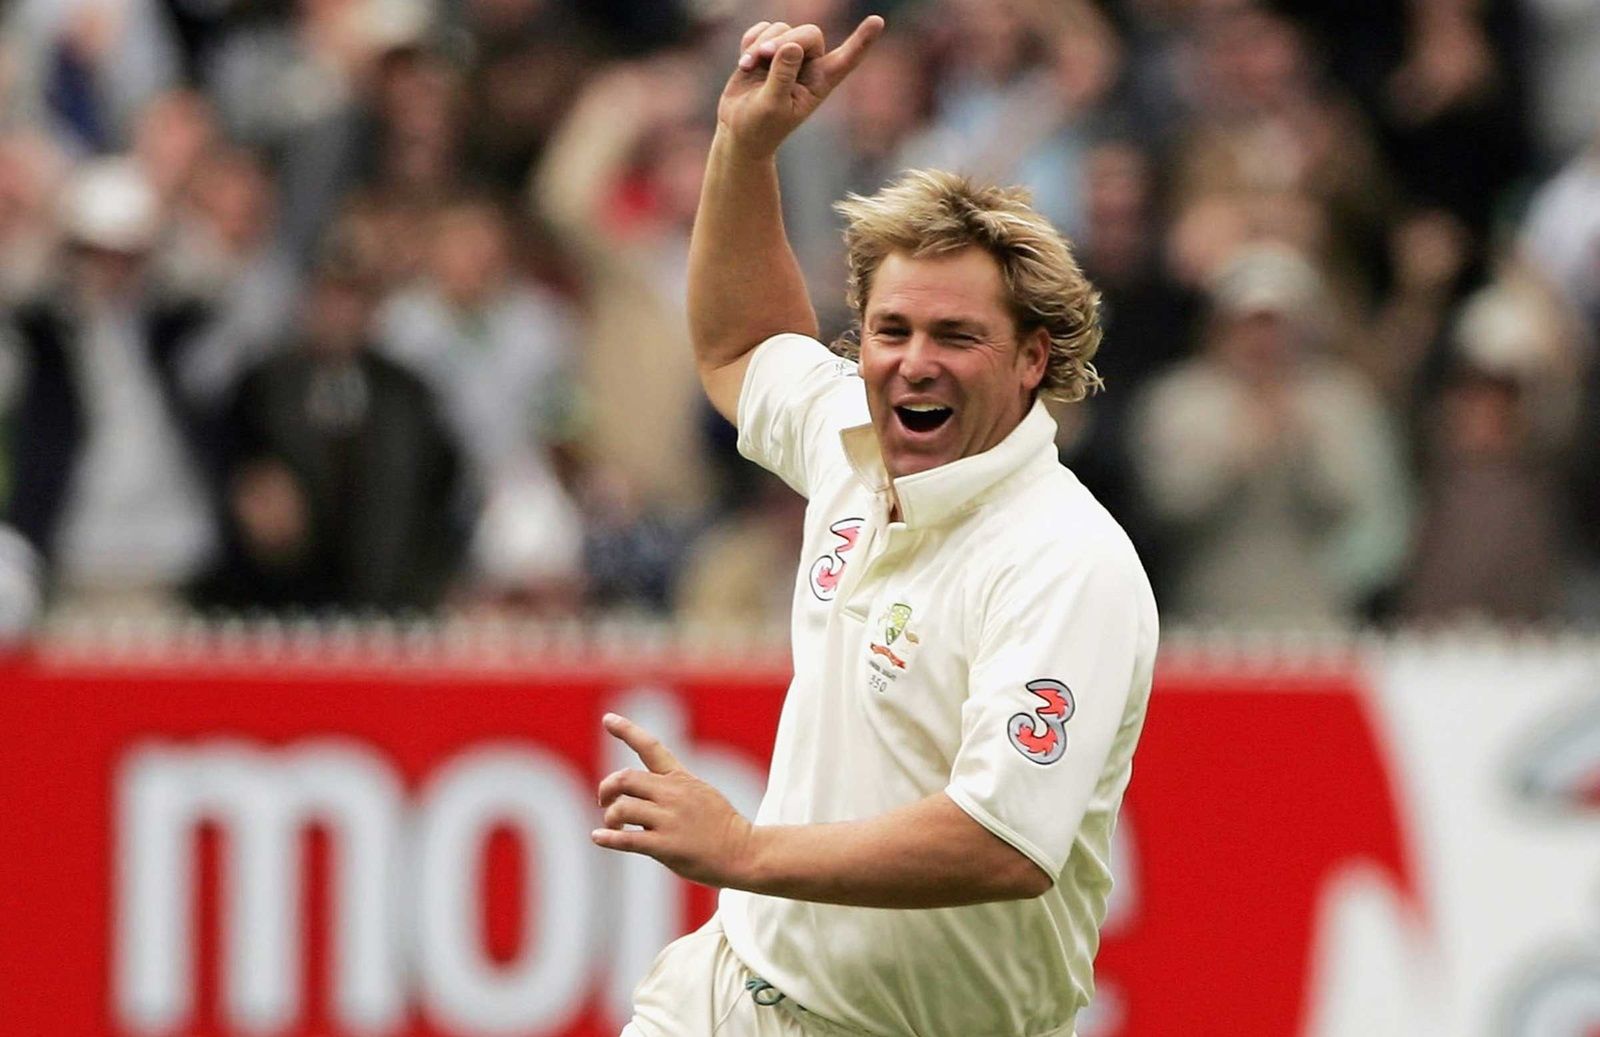 Shane Warne's top wickets countdown concludes